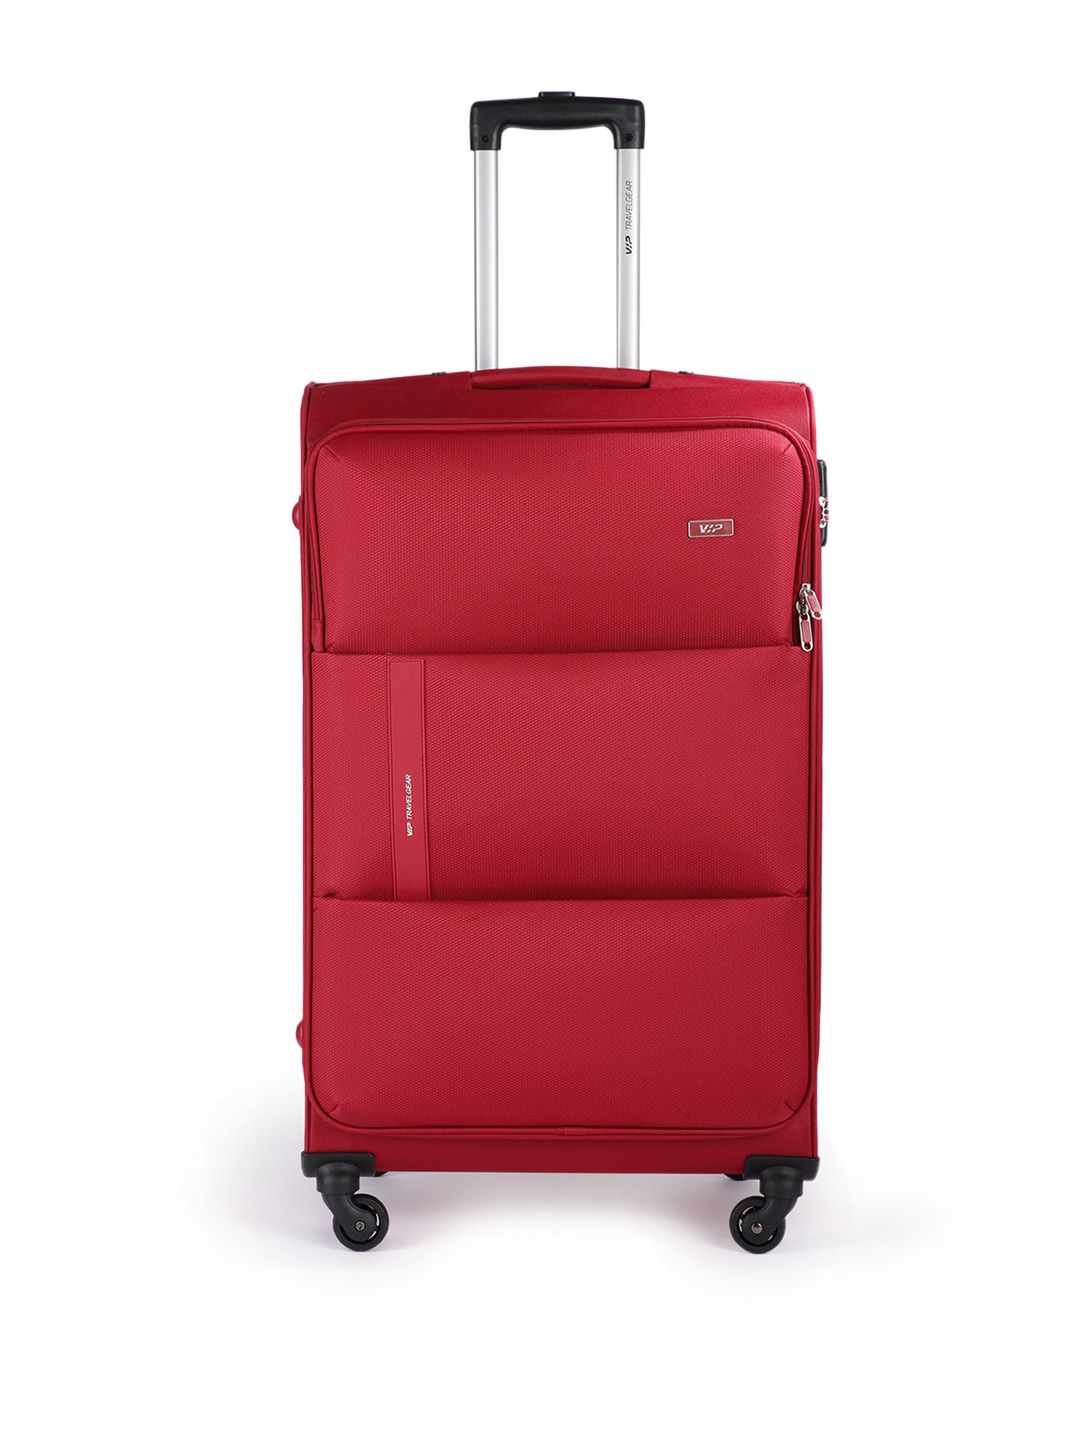 VIP Red Cabin Widget STR Trolley Suitcase Price in India